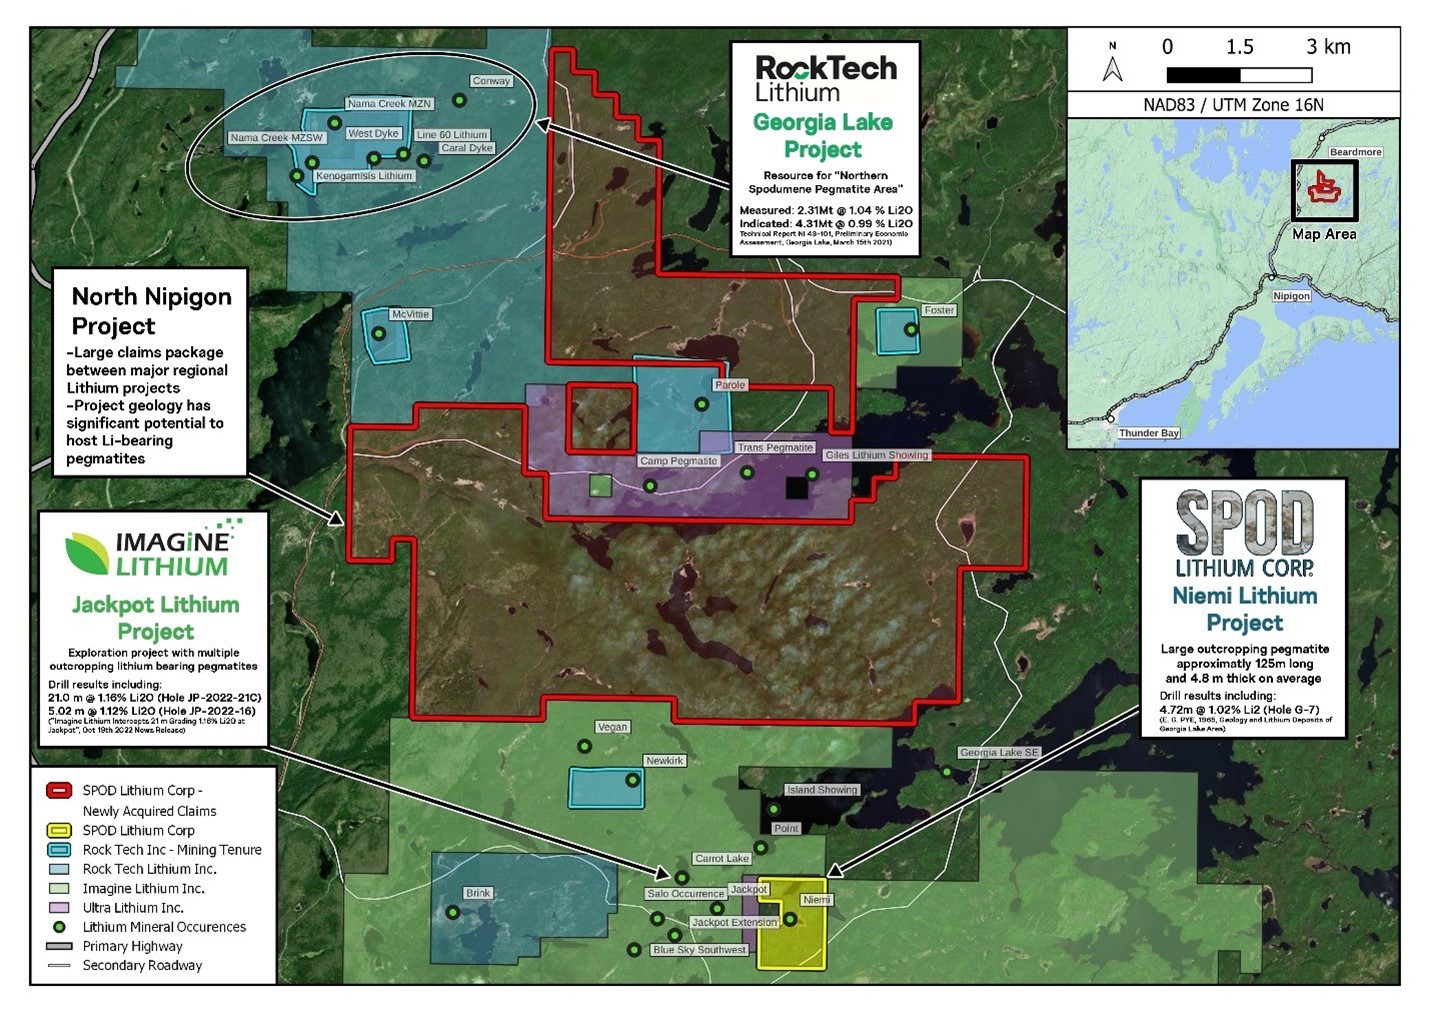 Figure 1 shows the North Nipigon – Niemi Project with Rock Tech and Imagine Lithium’s developing deposits.